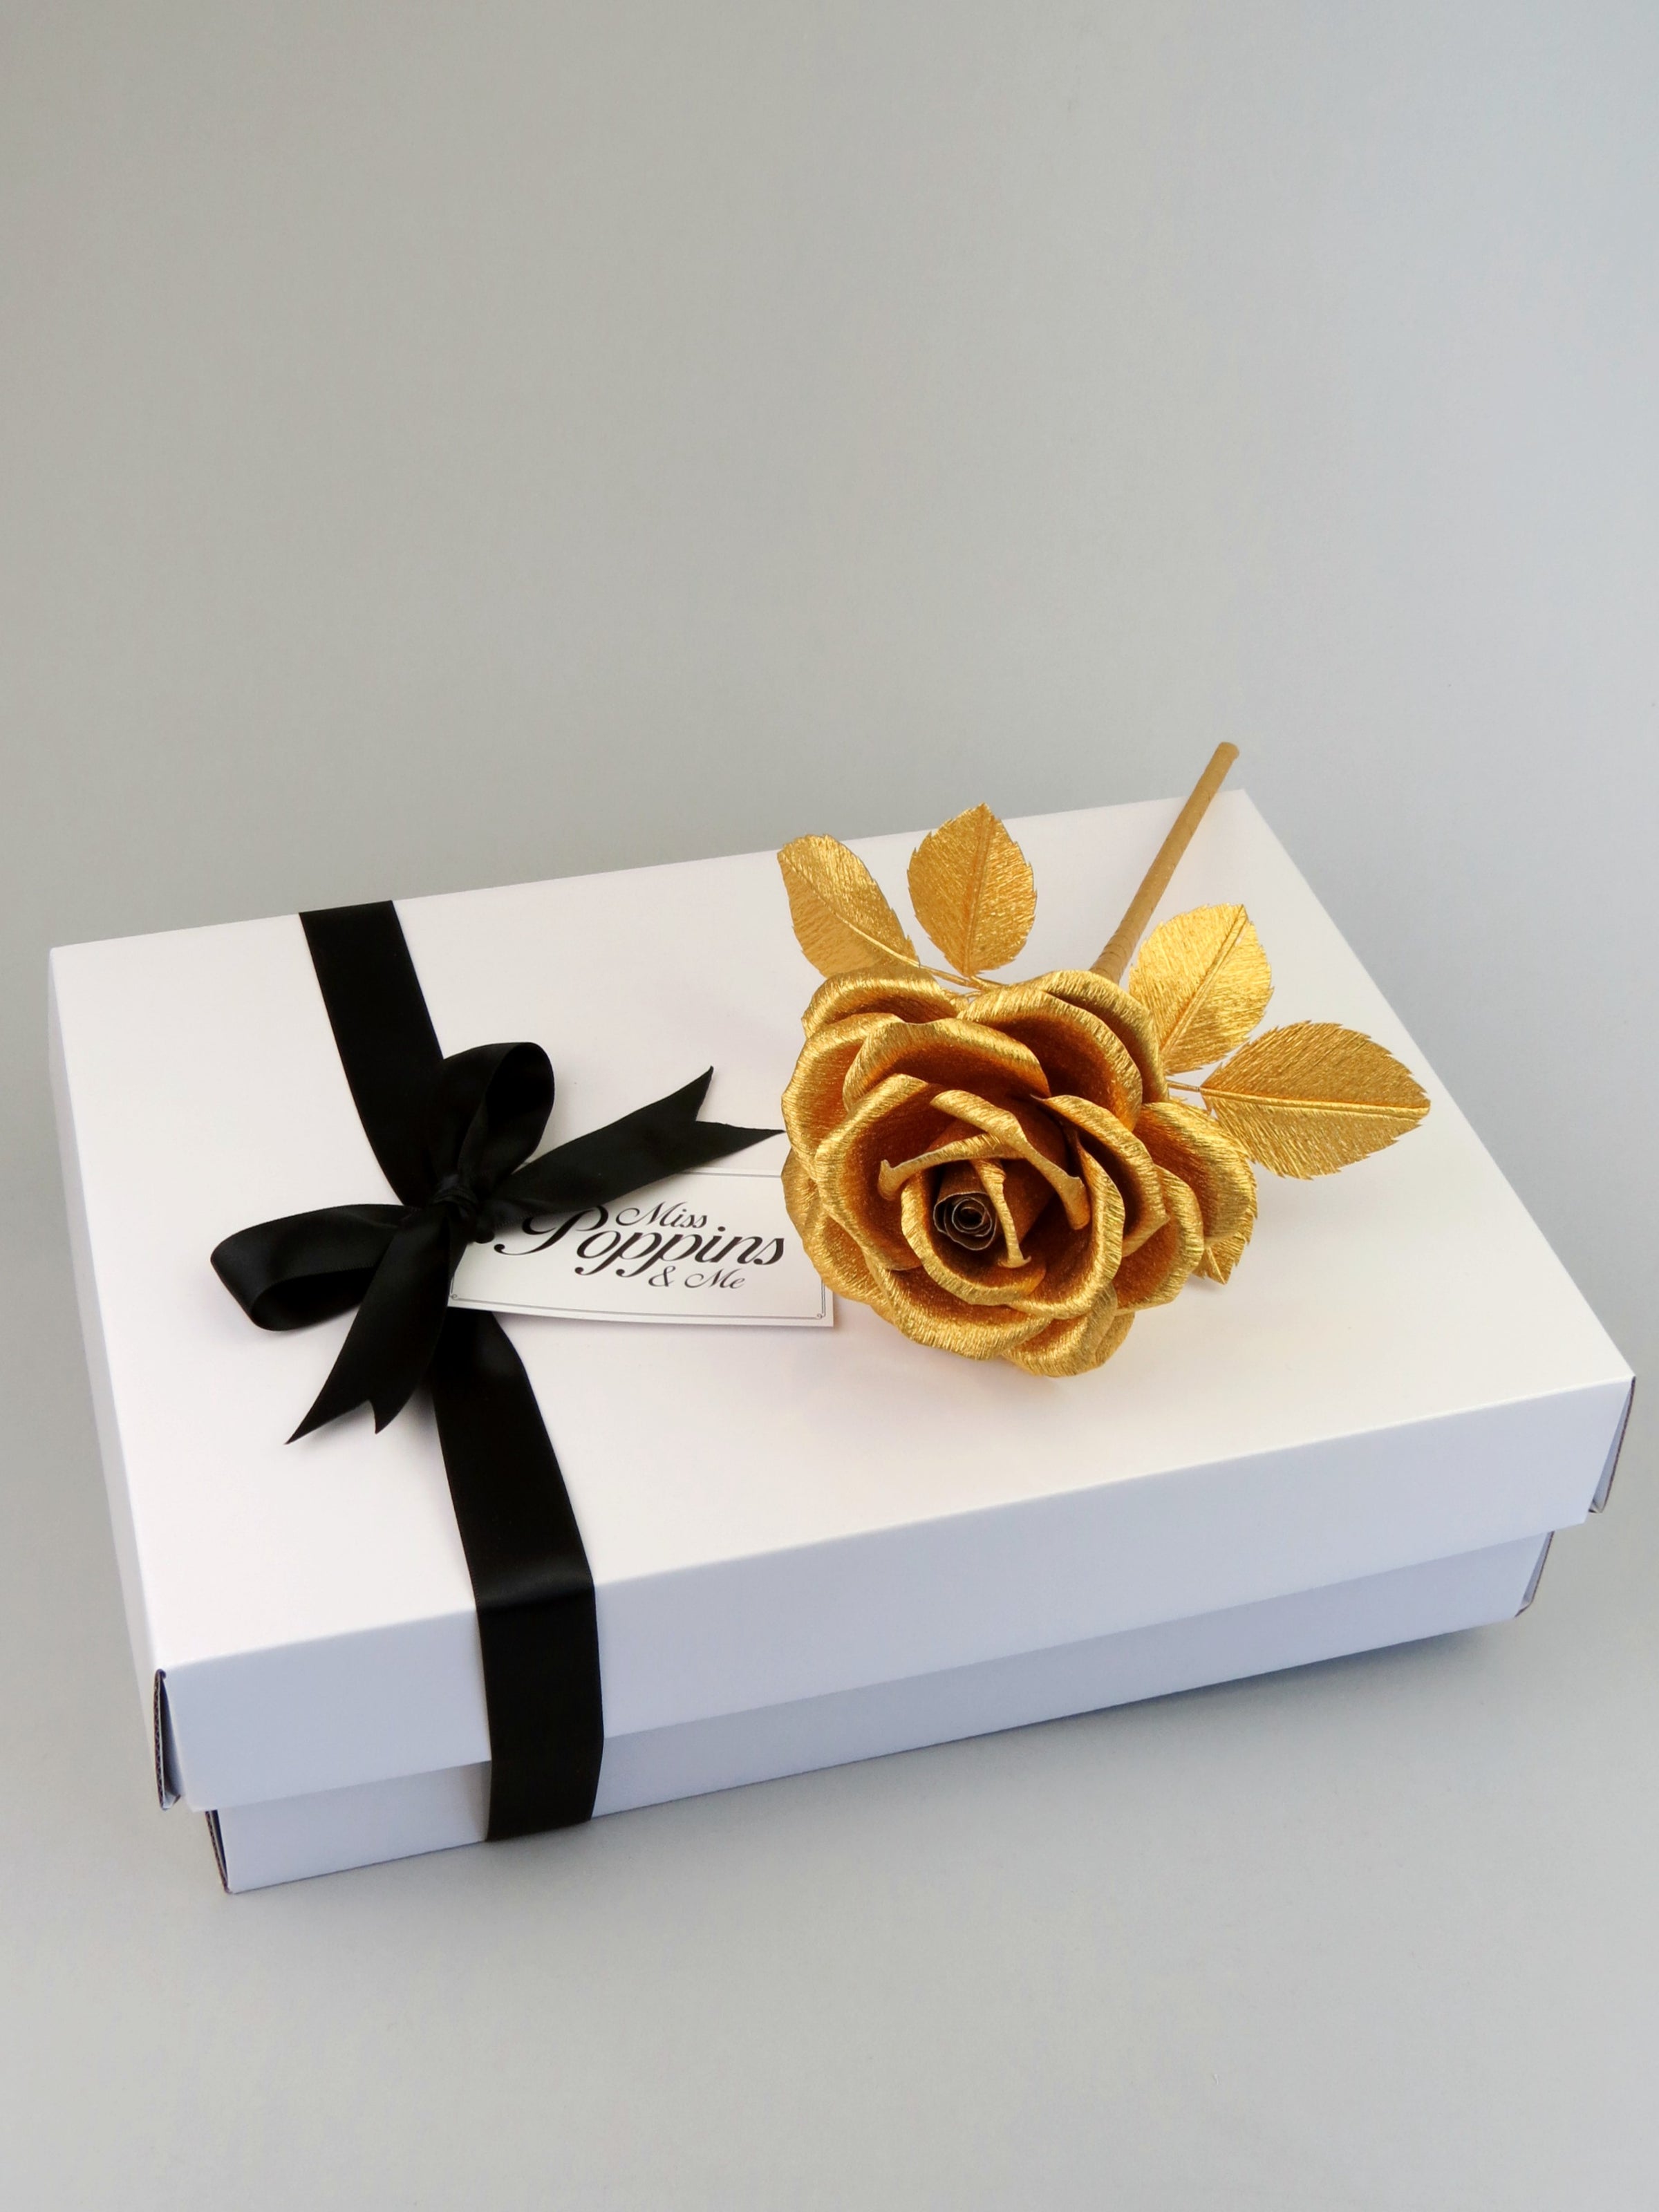 Gold crepe paper rose lying diagonally on top of a luxury white gift box that has a black satin ribbon tied in a bow with a Miss Poppins and Me gift tag attached